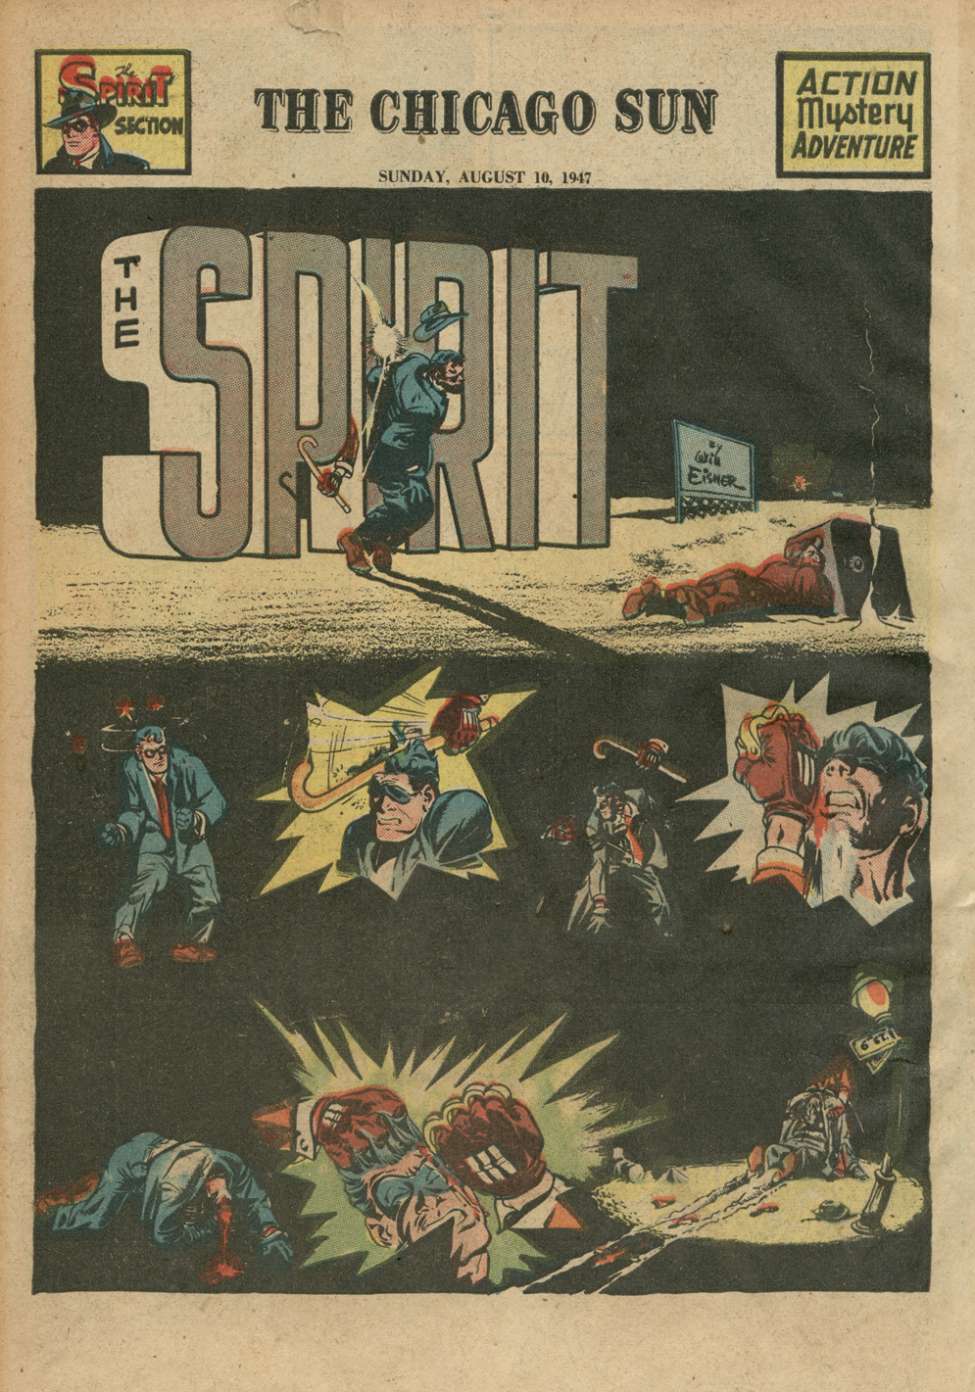 Comic Book Cover For The Spirit (1947-08-10) - Chicago Sun